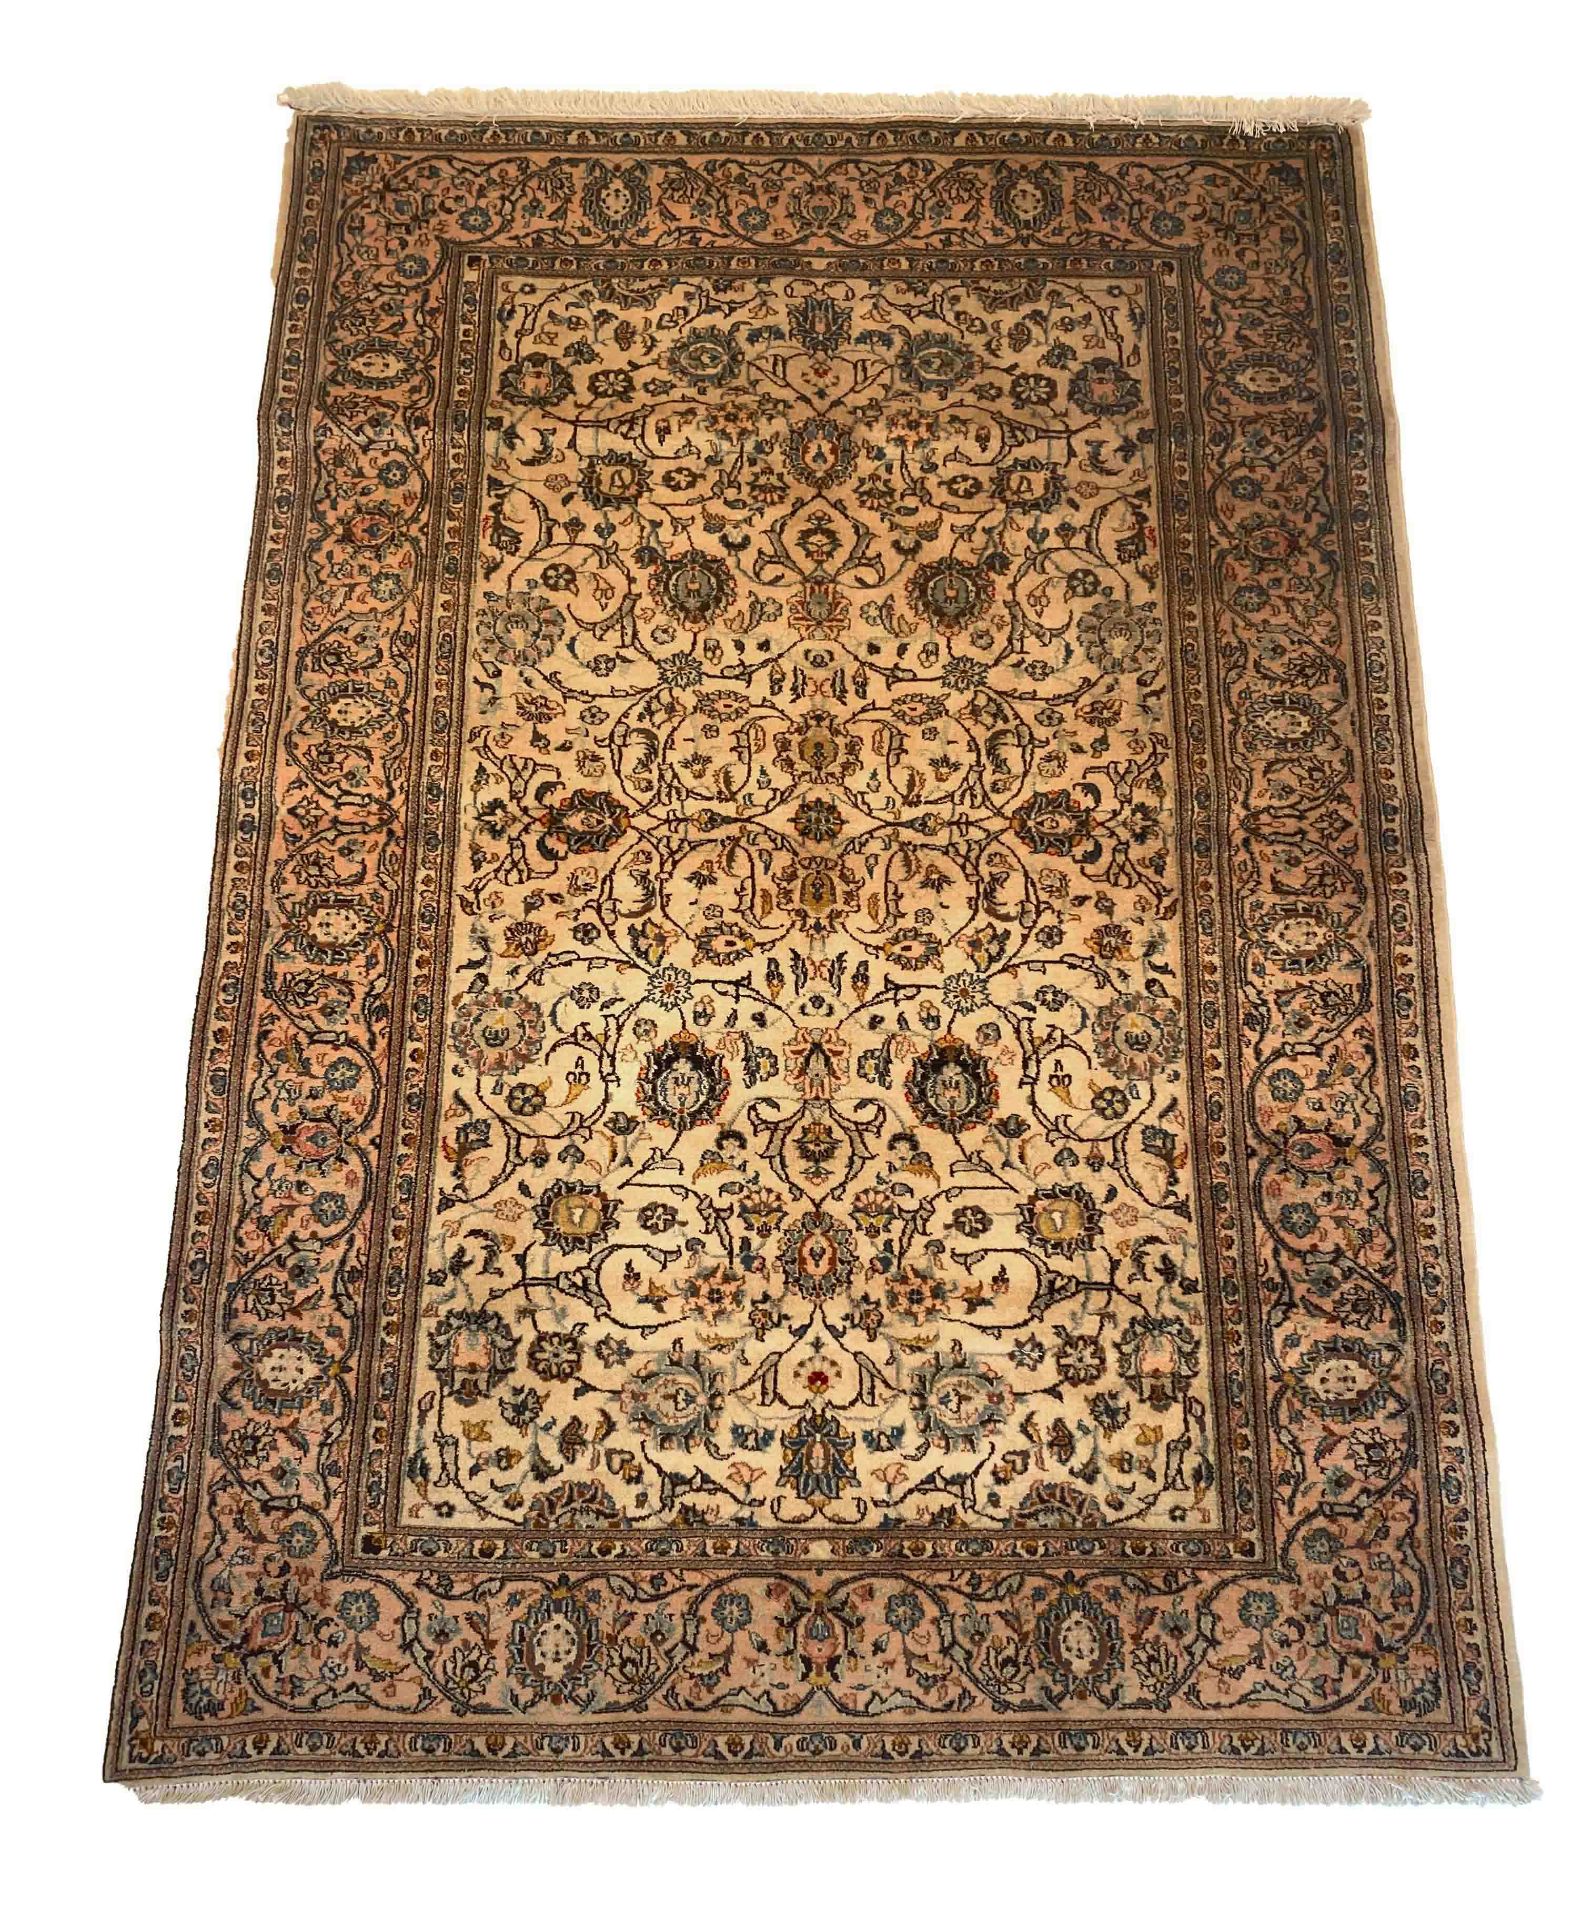 Carpet, Keshan, good condition, 206 x 141 cm - The carpet can only be viewed and collected at